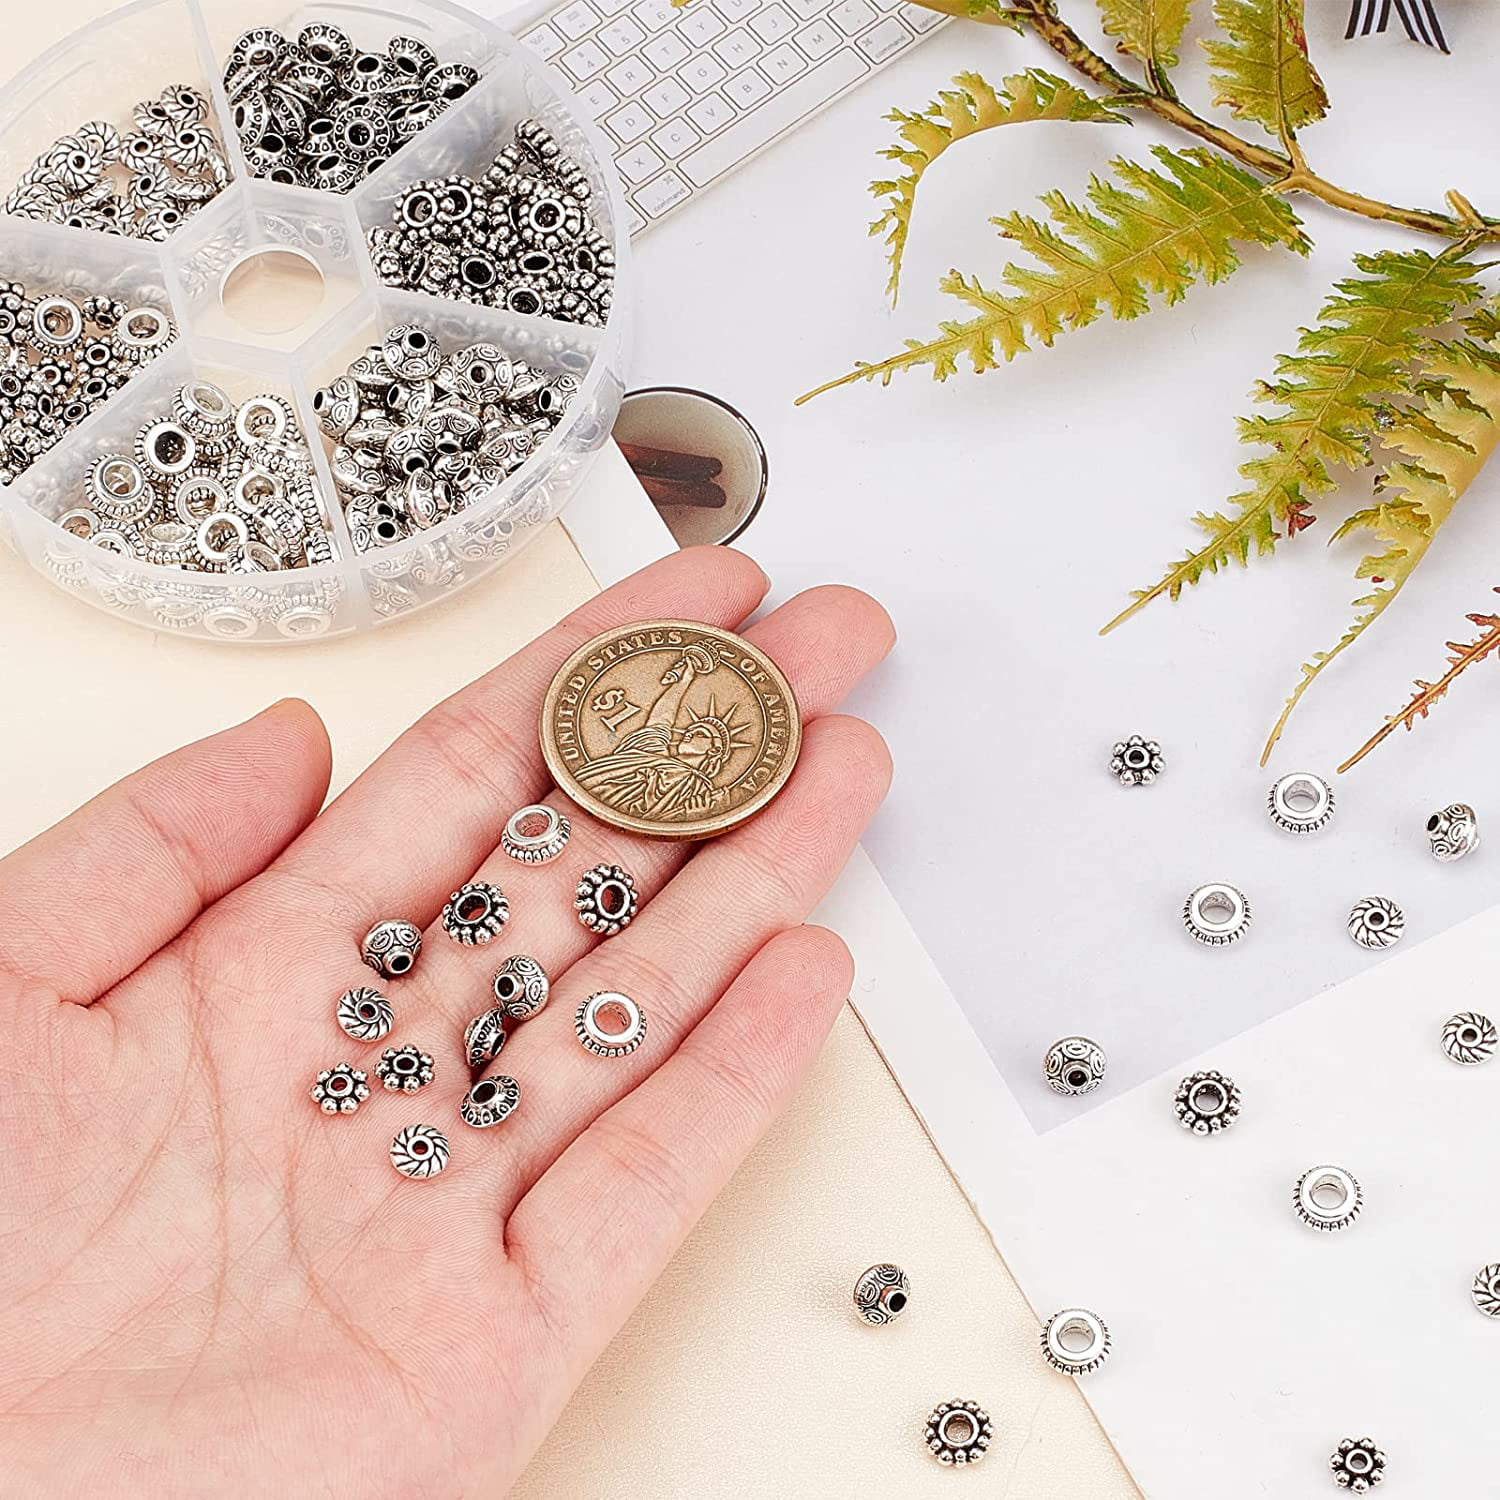 180pcs± Silver Spacer Beads for Jewelry Making- 100g Tibetan Beads Spacer  24 Styles Antique Silver Metal Beads Small Loose Sterling Spacer Beads for